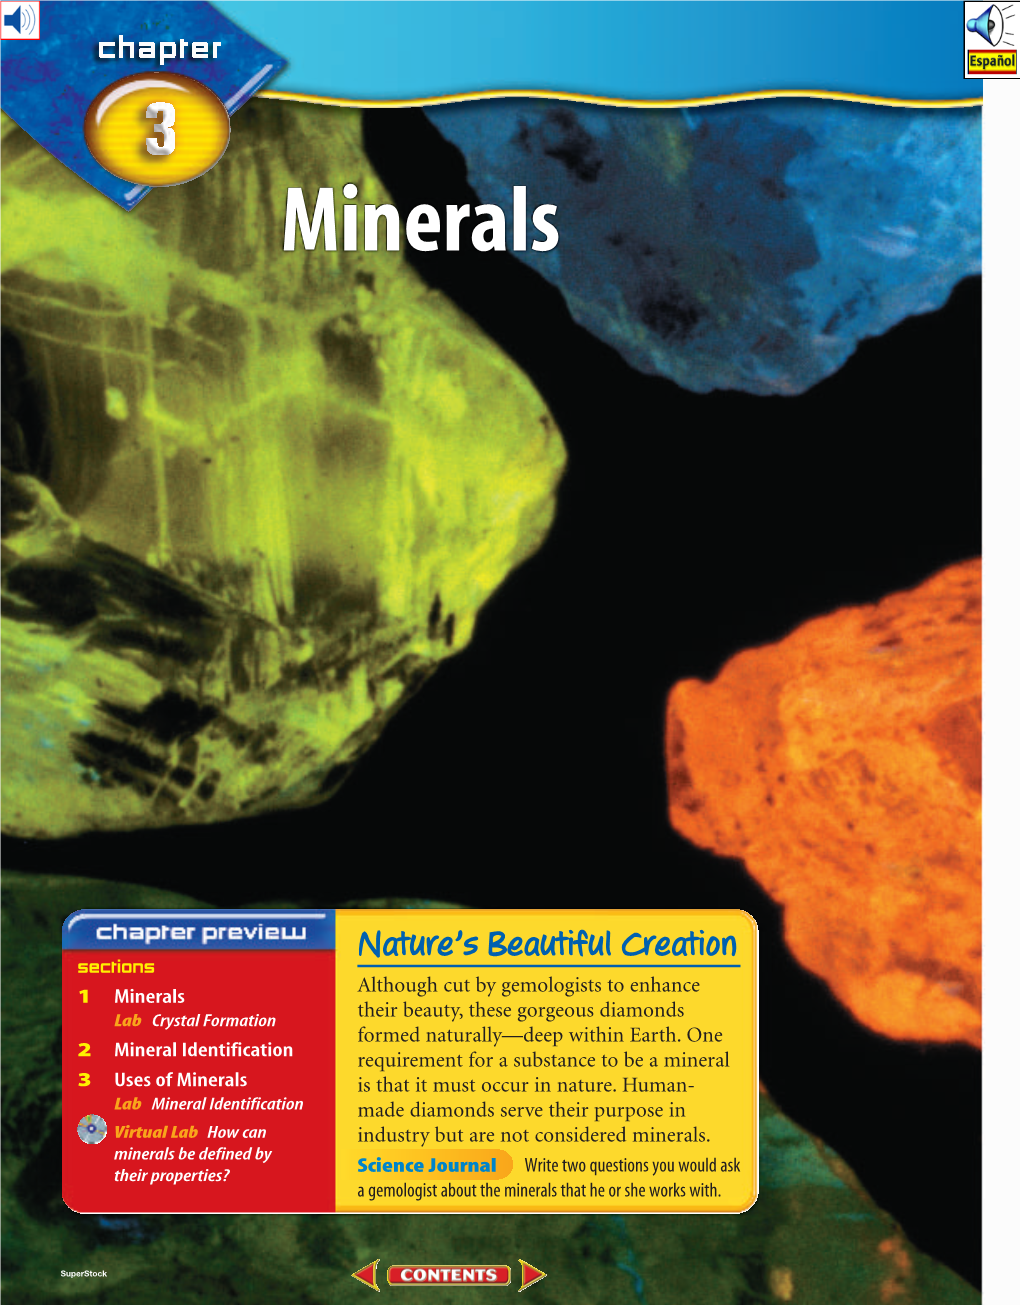 Chapter 3: Minerals